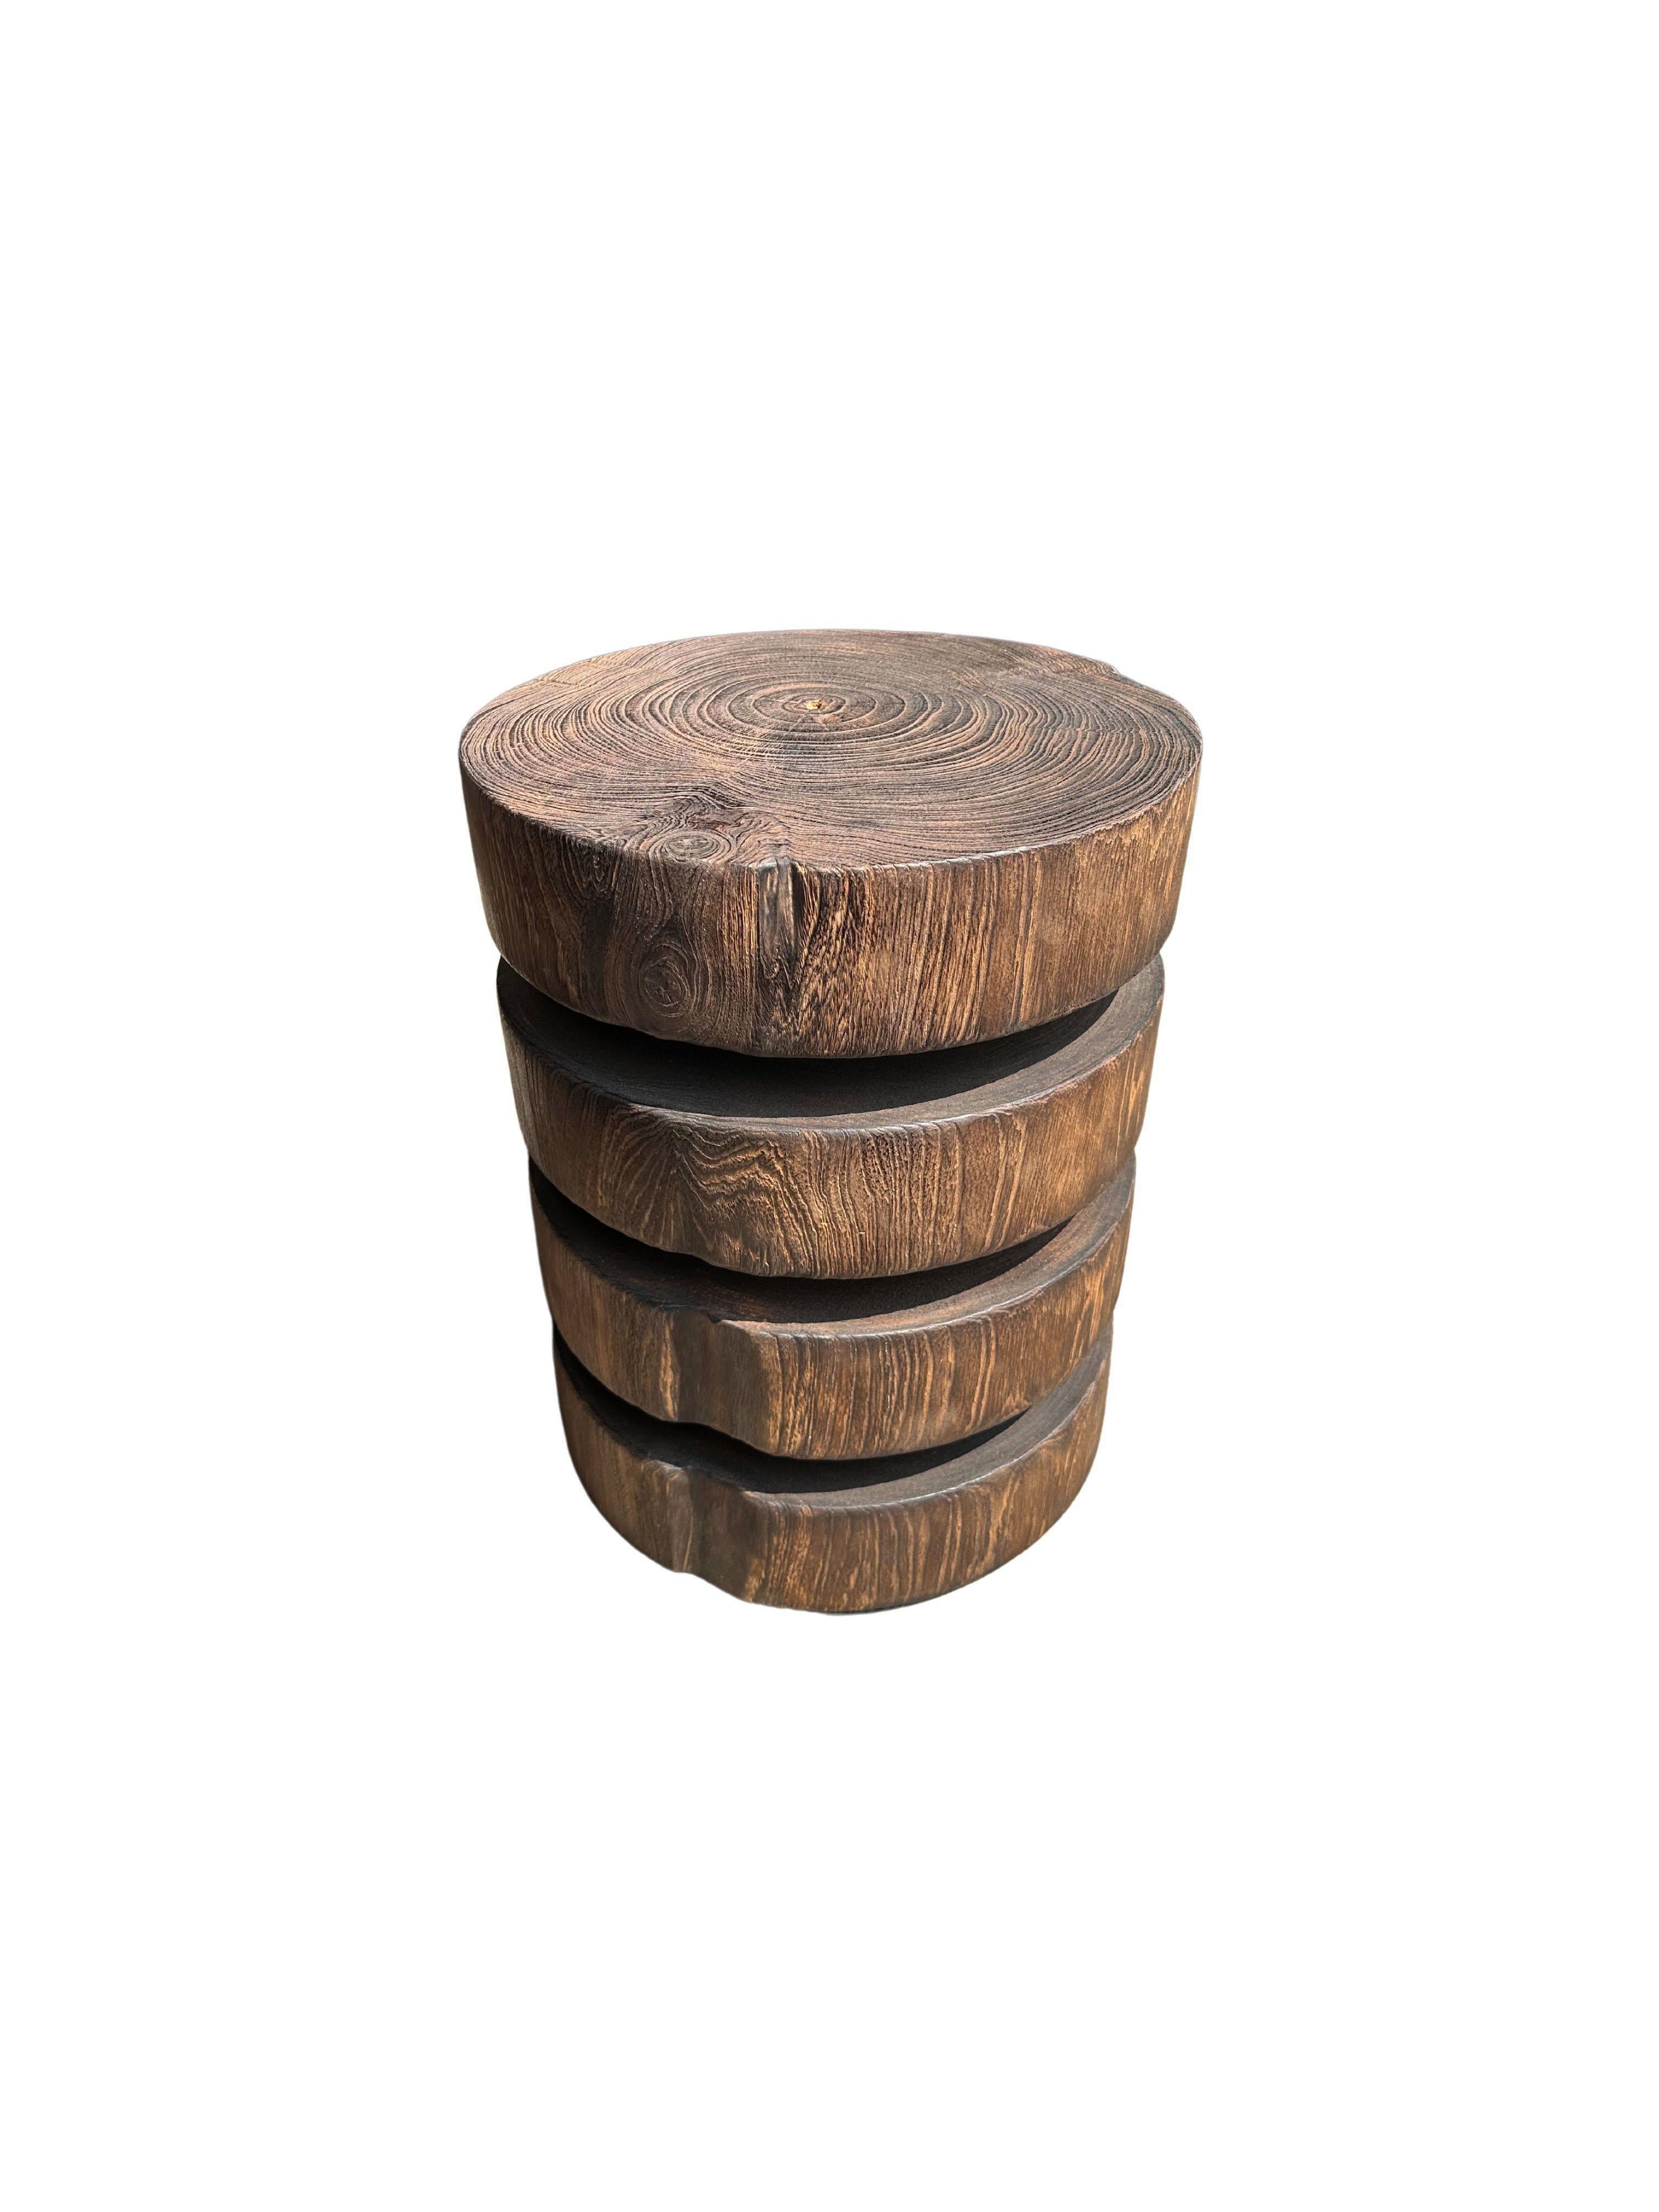 Organic Modern Sculptural Round Table Crafted from Solid Suar Wood Stacked Design For Sale